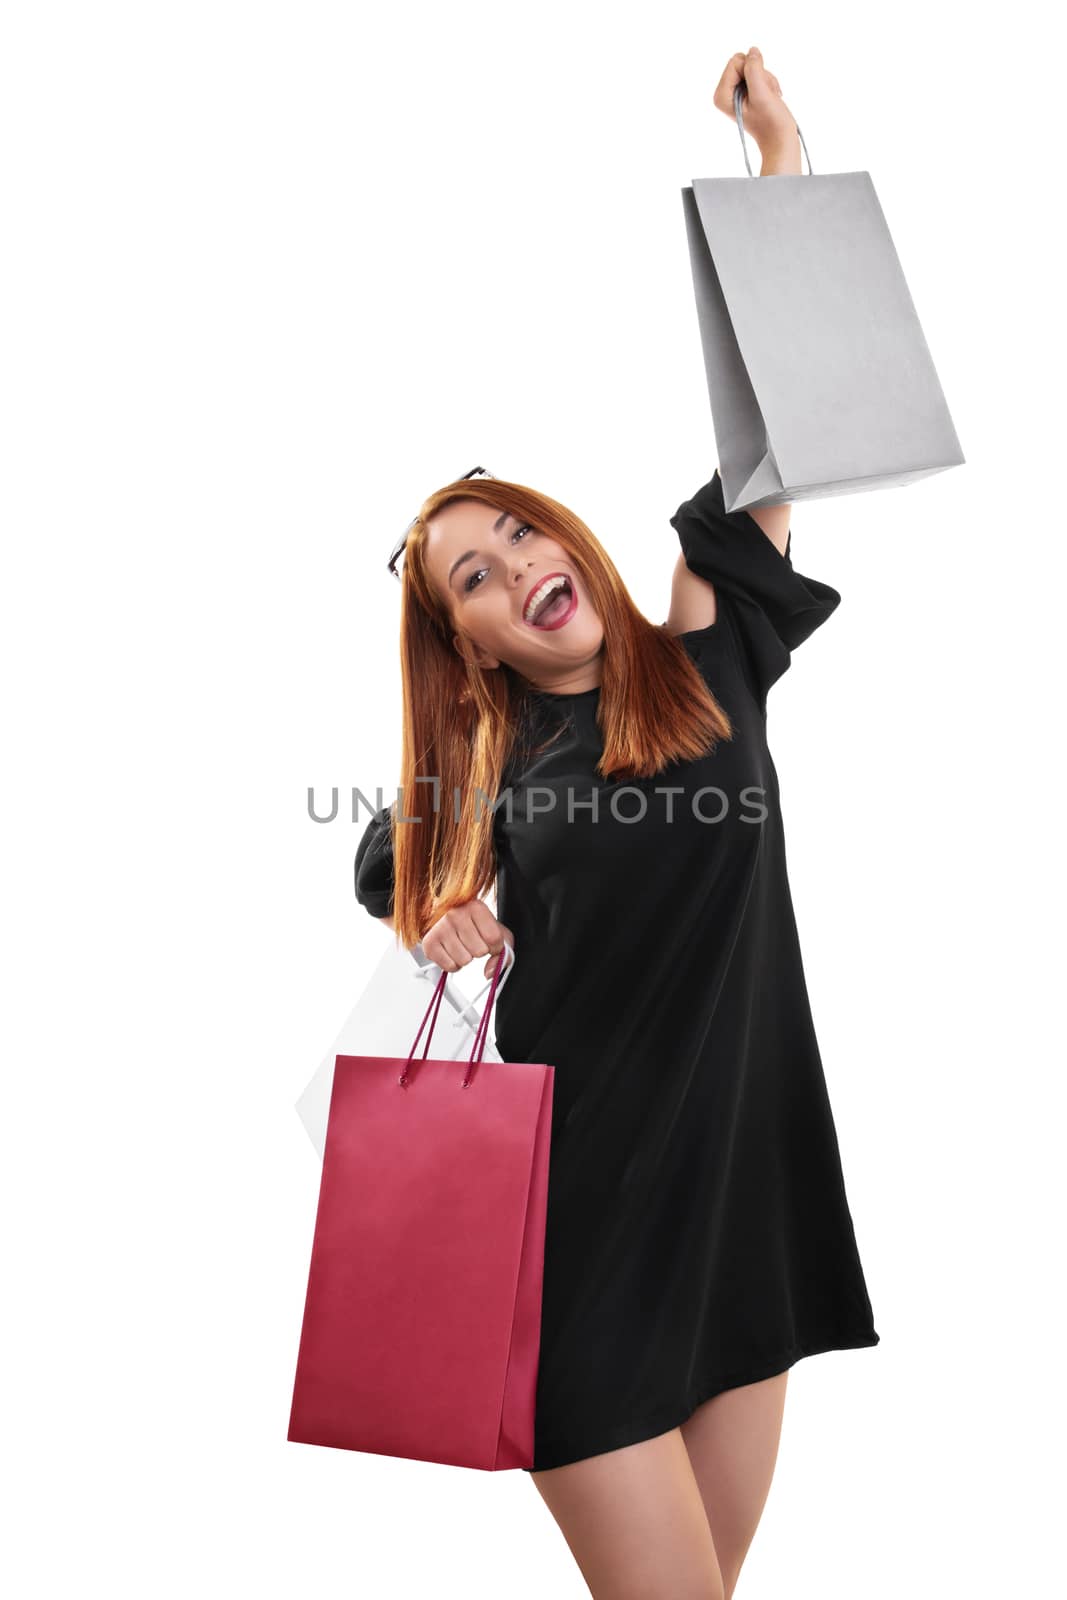 Excited and happy young woman with shopping bags by Mendelex